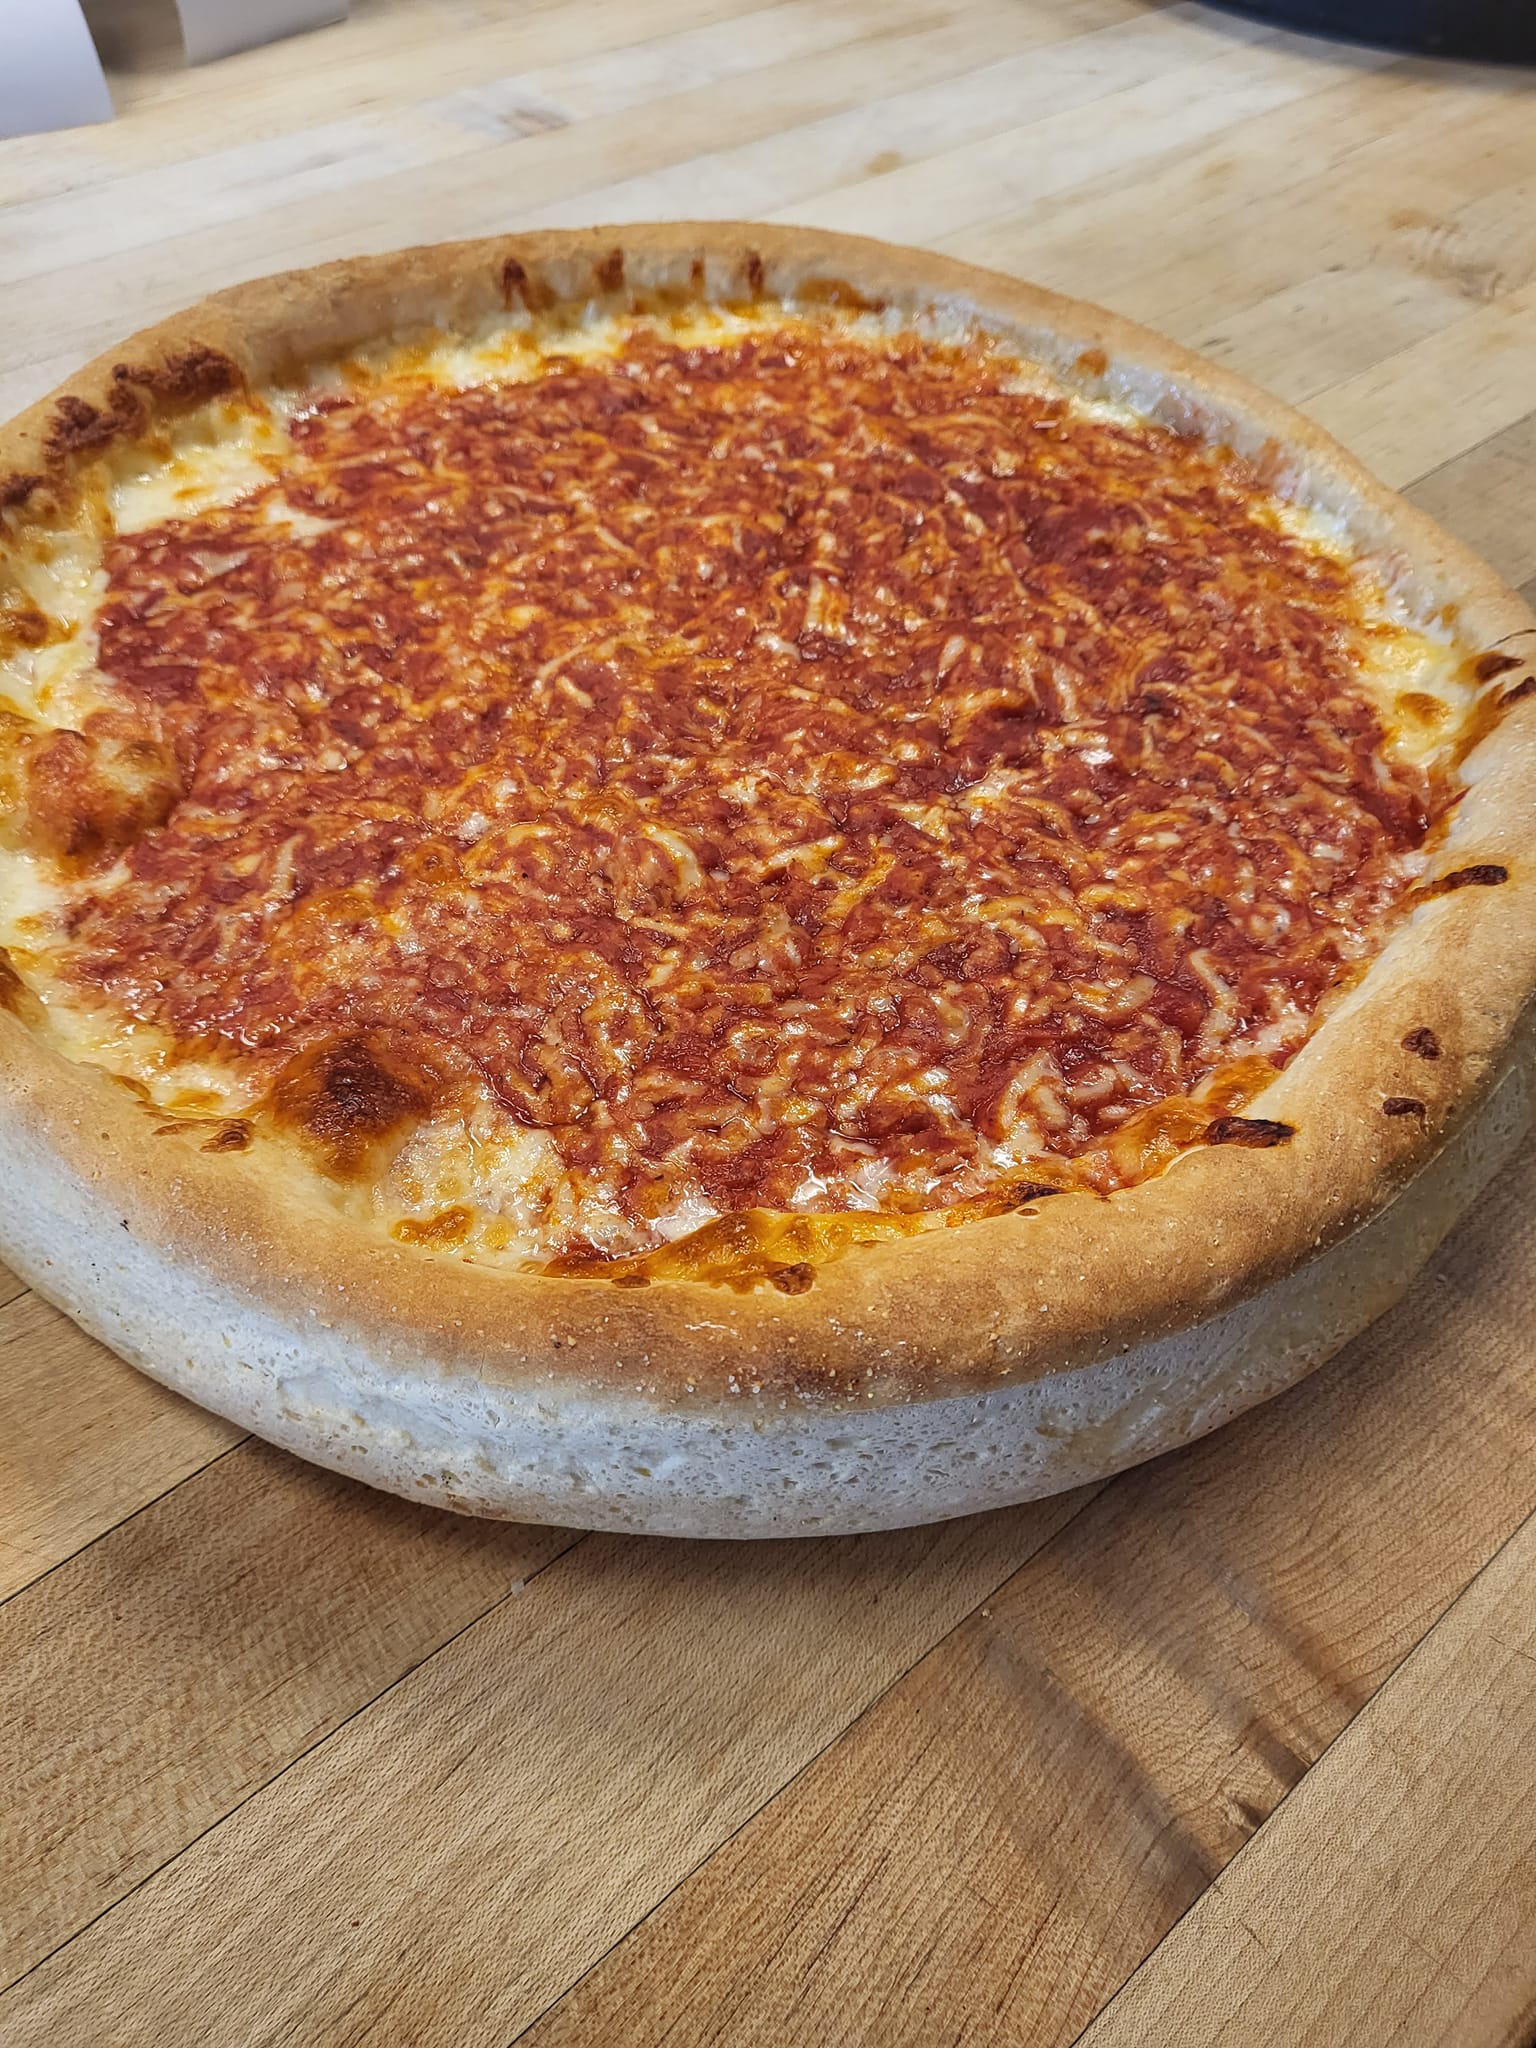 Old Chicago Pizza Delivery & Takeout